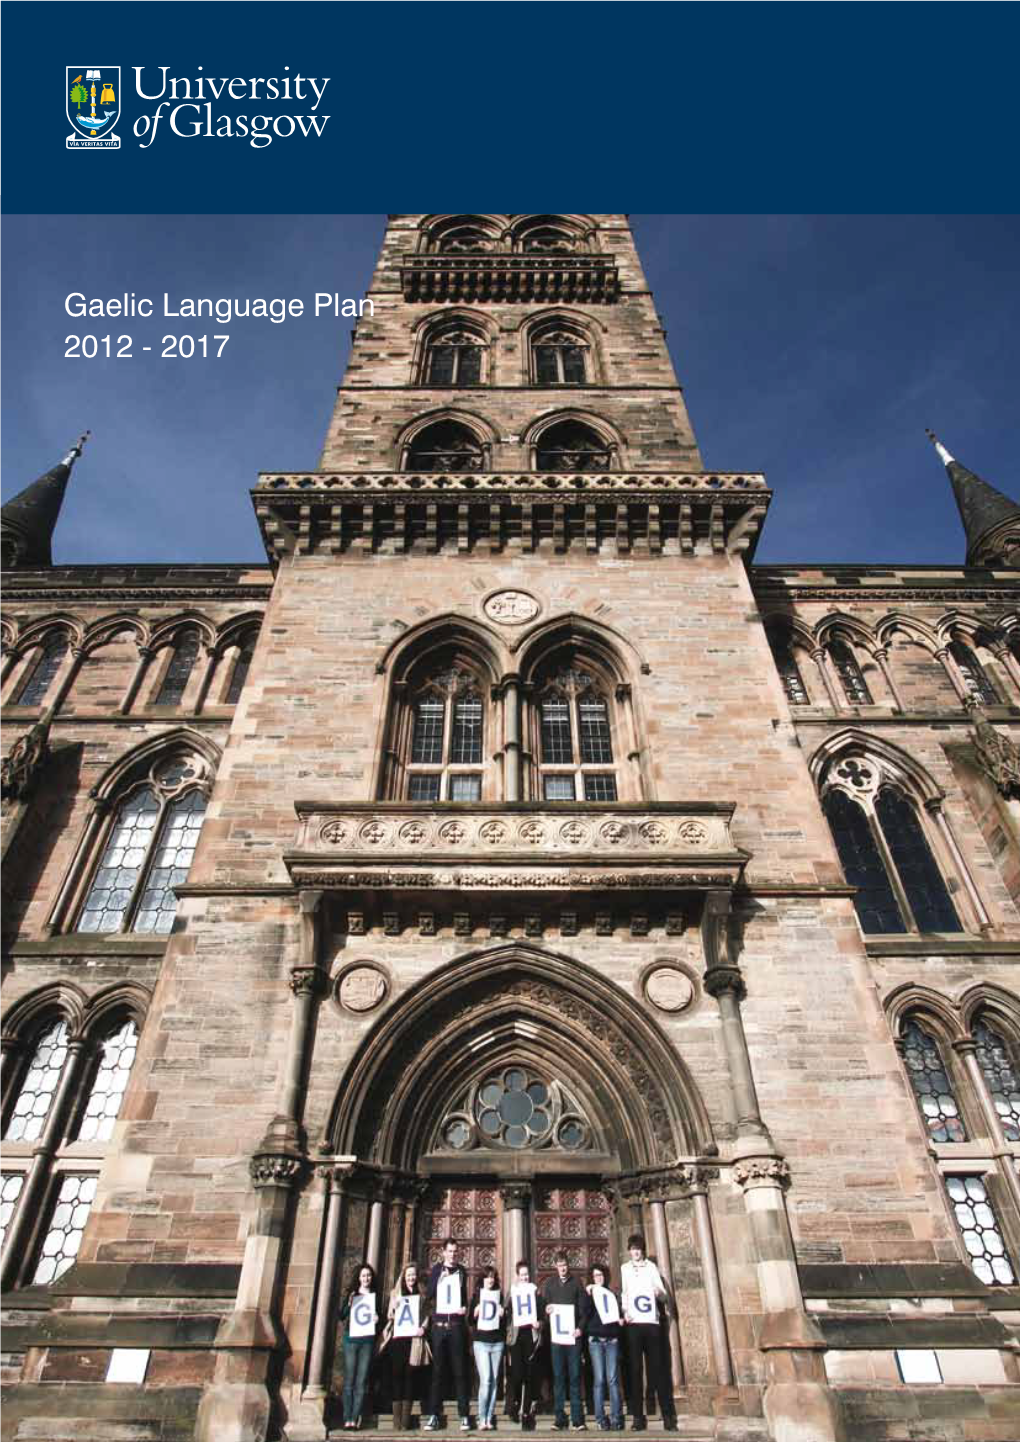 The University of Glasgow Recognises That Gaelic Is an Integral Part of Scotland's Heritage, National Identity and Cultural Life